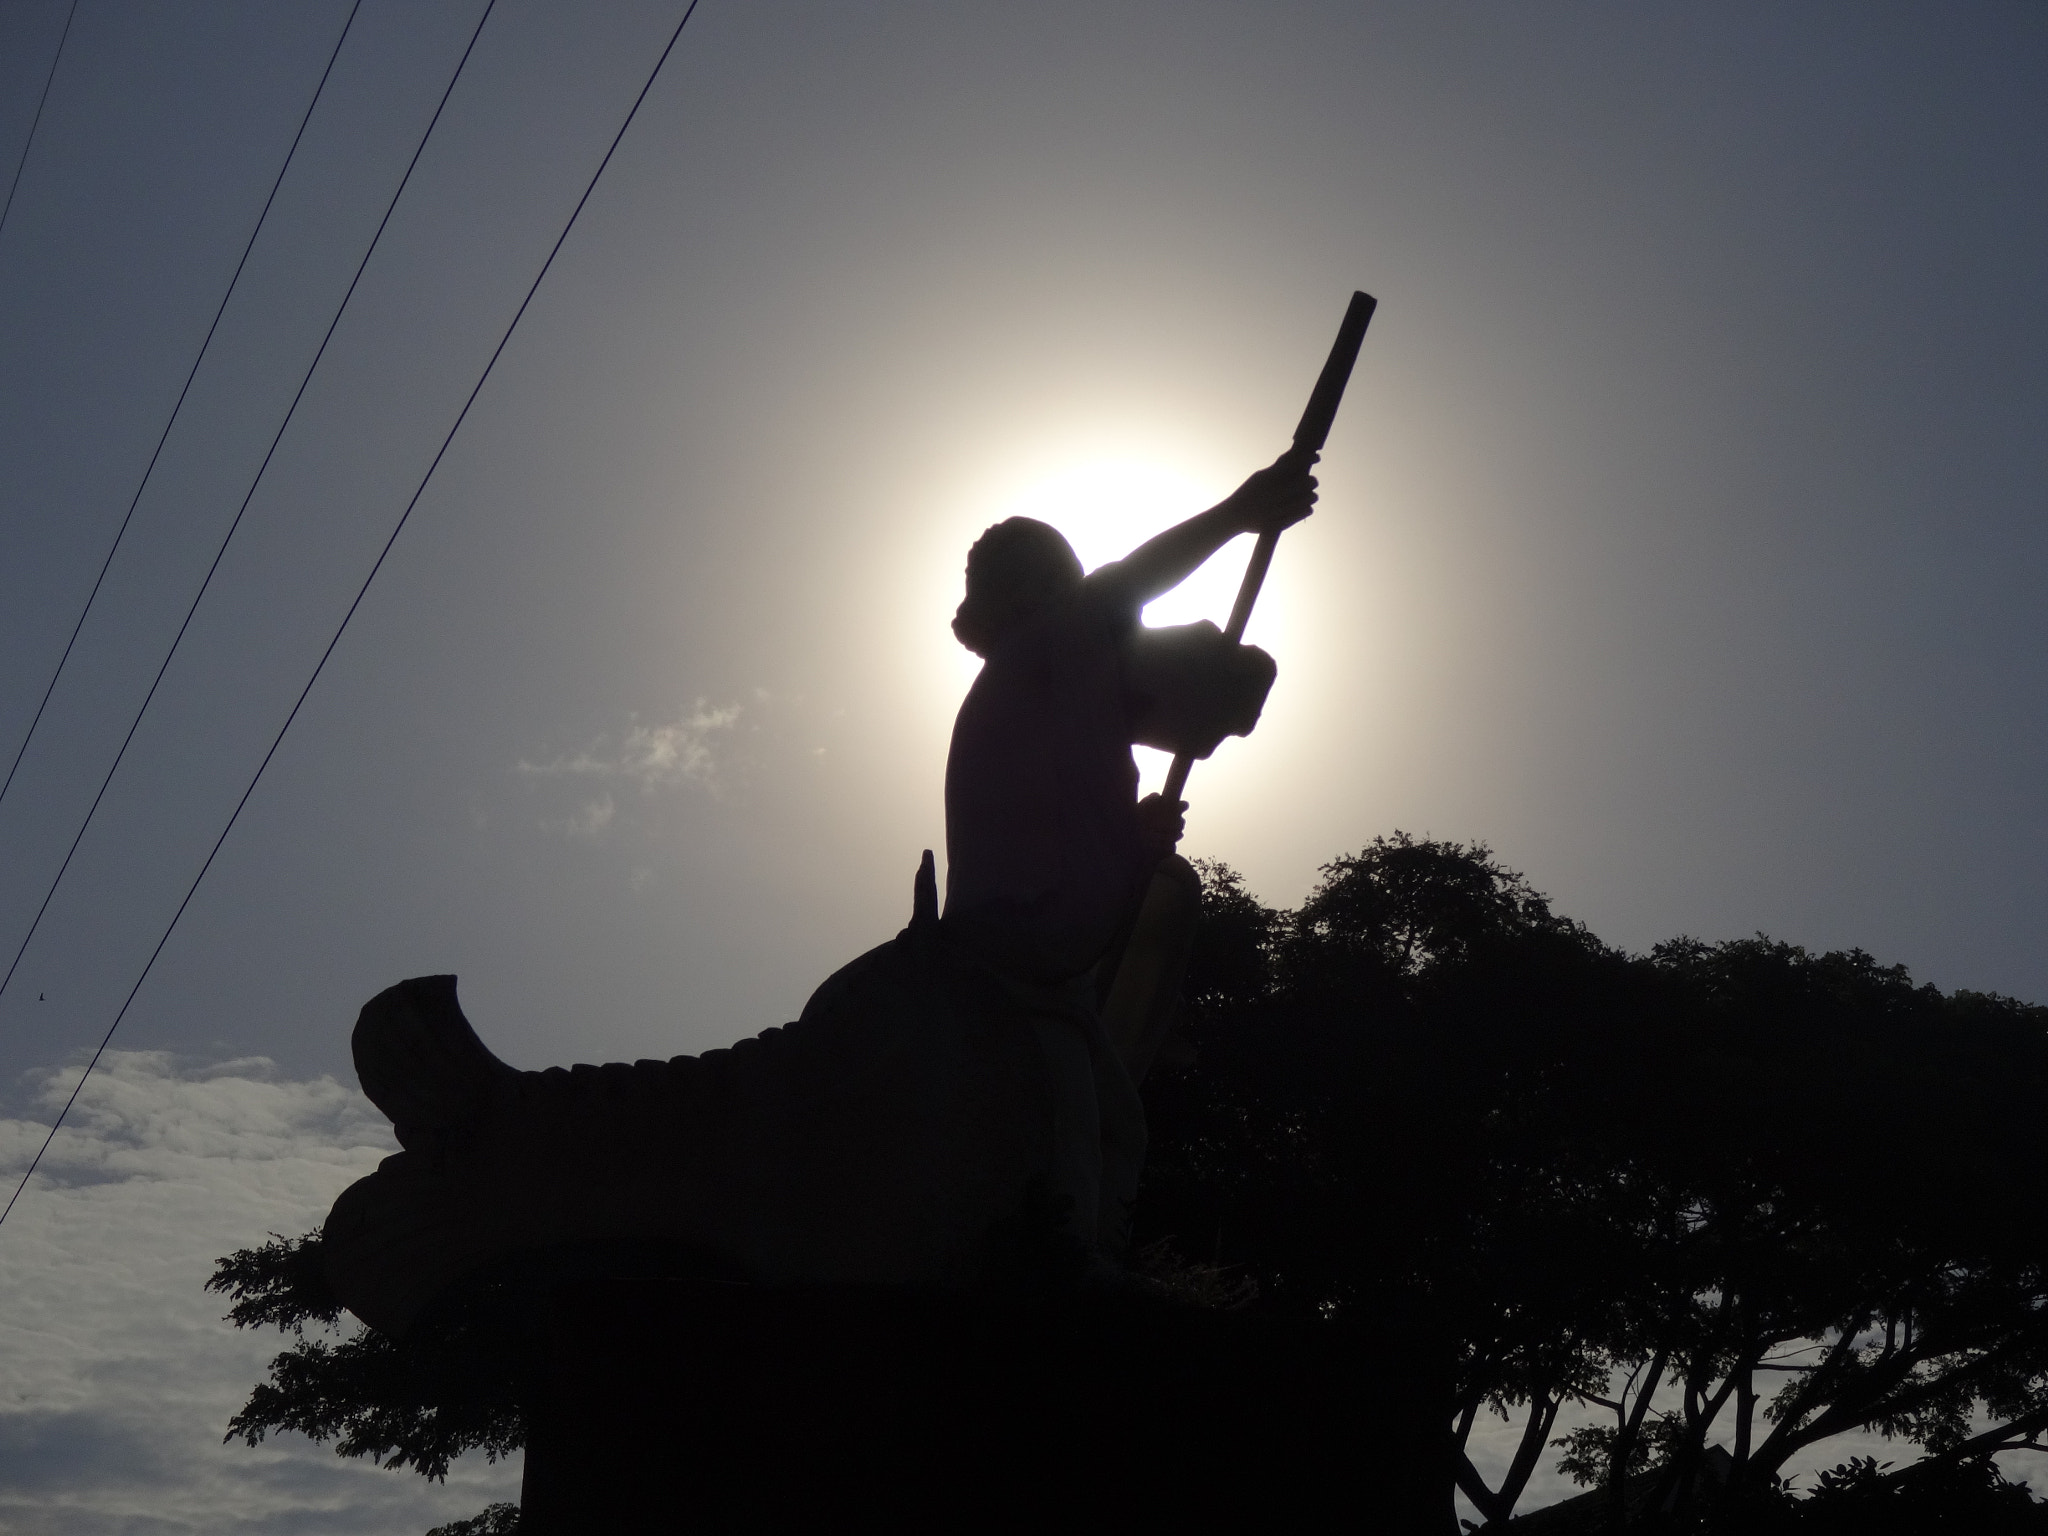 Sony Cyber-shot DSC-QX10 sample photo. The statue silhouette photography